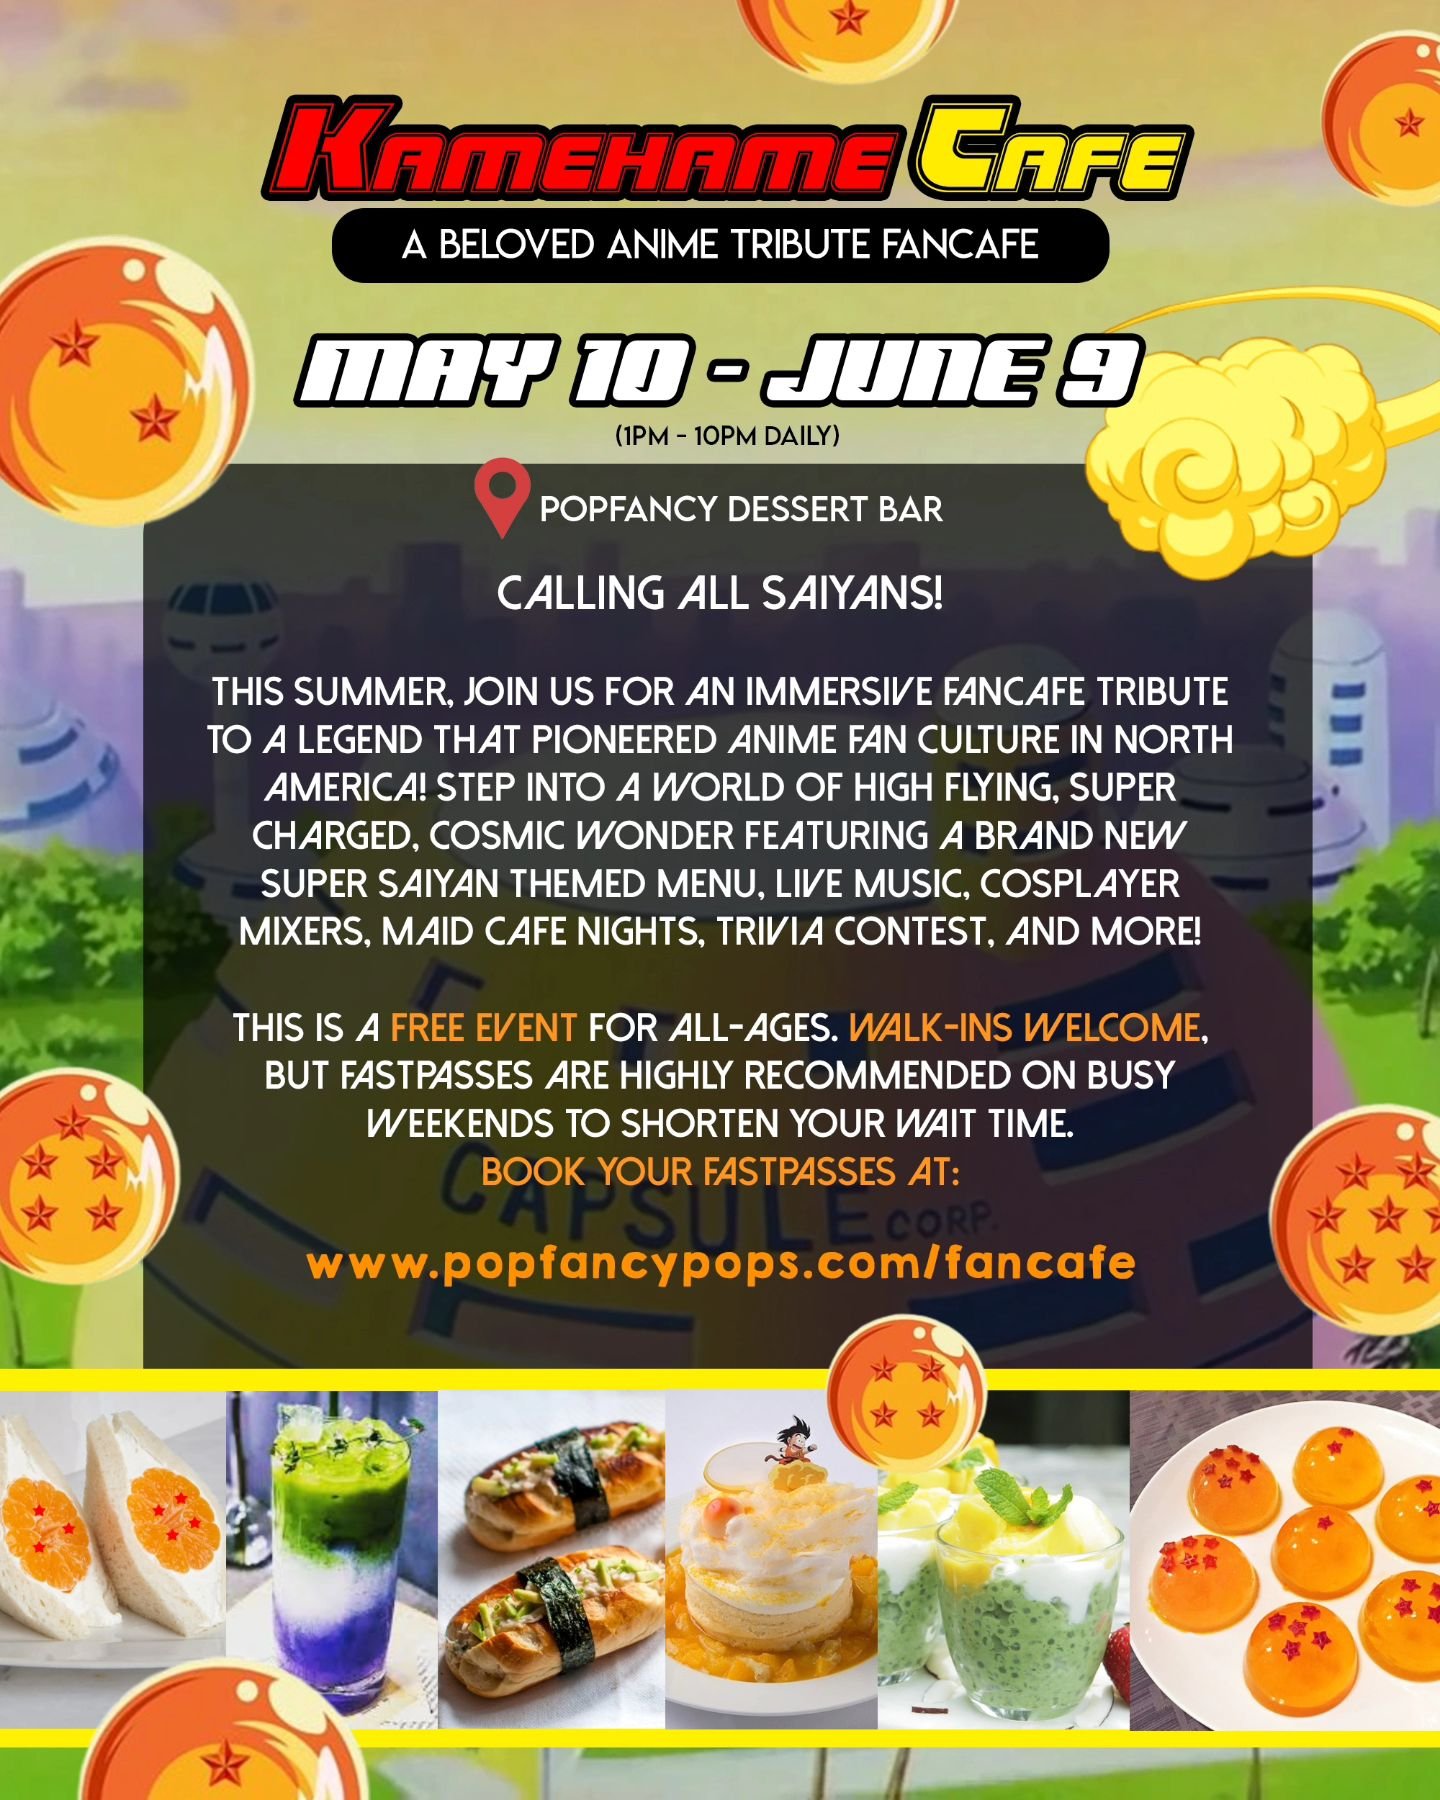 🐲🟠🟠🟠🟠🟠🟠🟠
Attention Saiyans‼️

🐉Join us this May 10 - June 9 for our Kamehame Cafe, a special anime tribute fan cafe. 

💪 Saiyan brothers and sisters, Get ready for an immersive anime pop-up featuring a brand new super saiyan themed menu, li